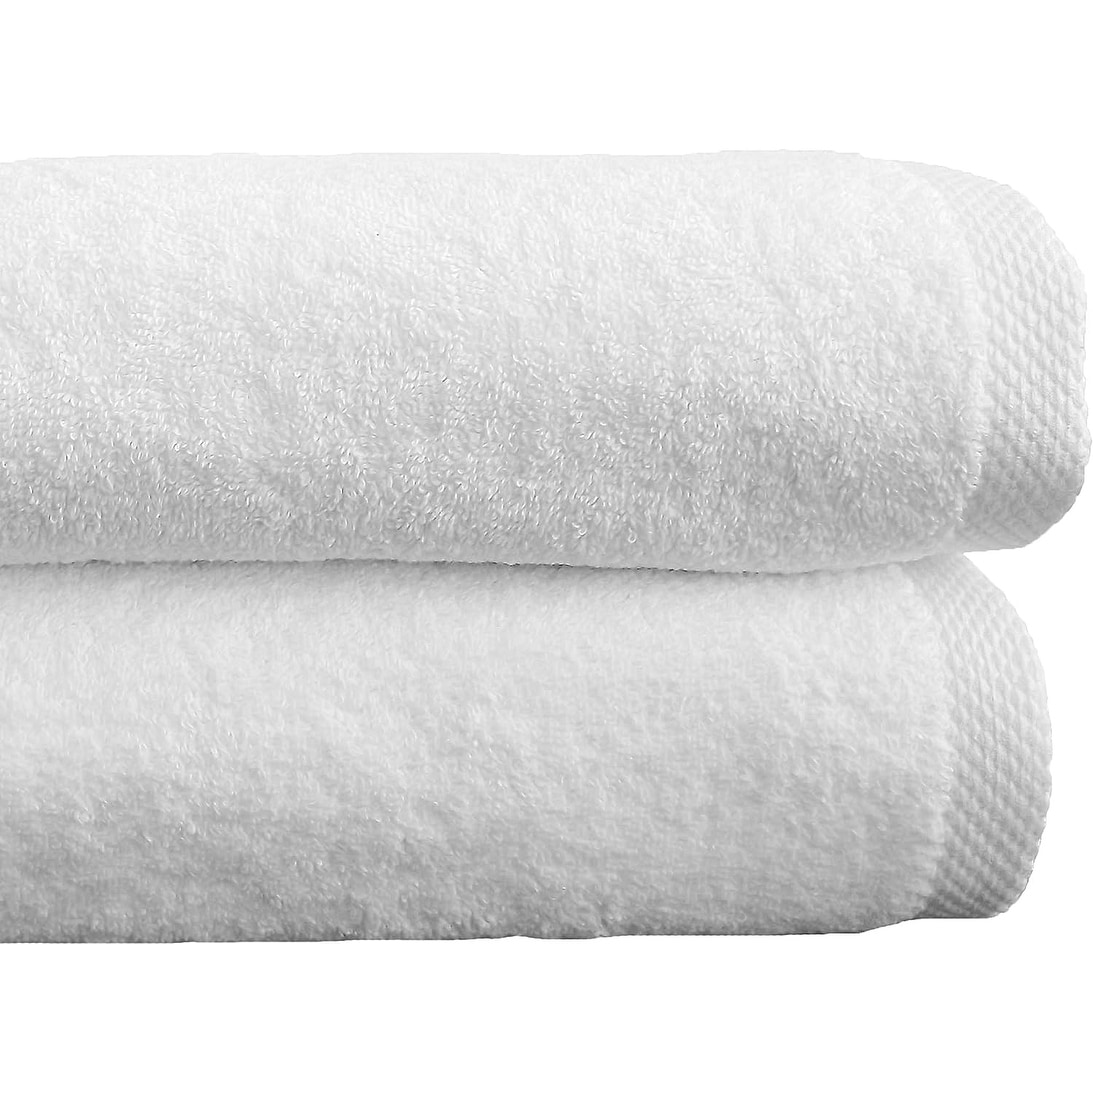 https://ak1.ostkcdn.com/images/products/is/images/direct/cbb3f993479469caa43bba48738a816879f4f7e2/Classic-Turkish-Cotton-Arsenal-Oversized-Bath-Sheet-Towels-Set-of-2.jpg